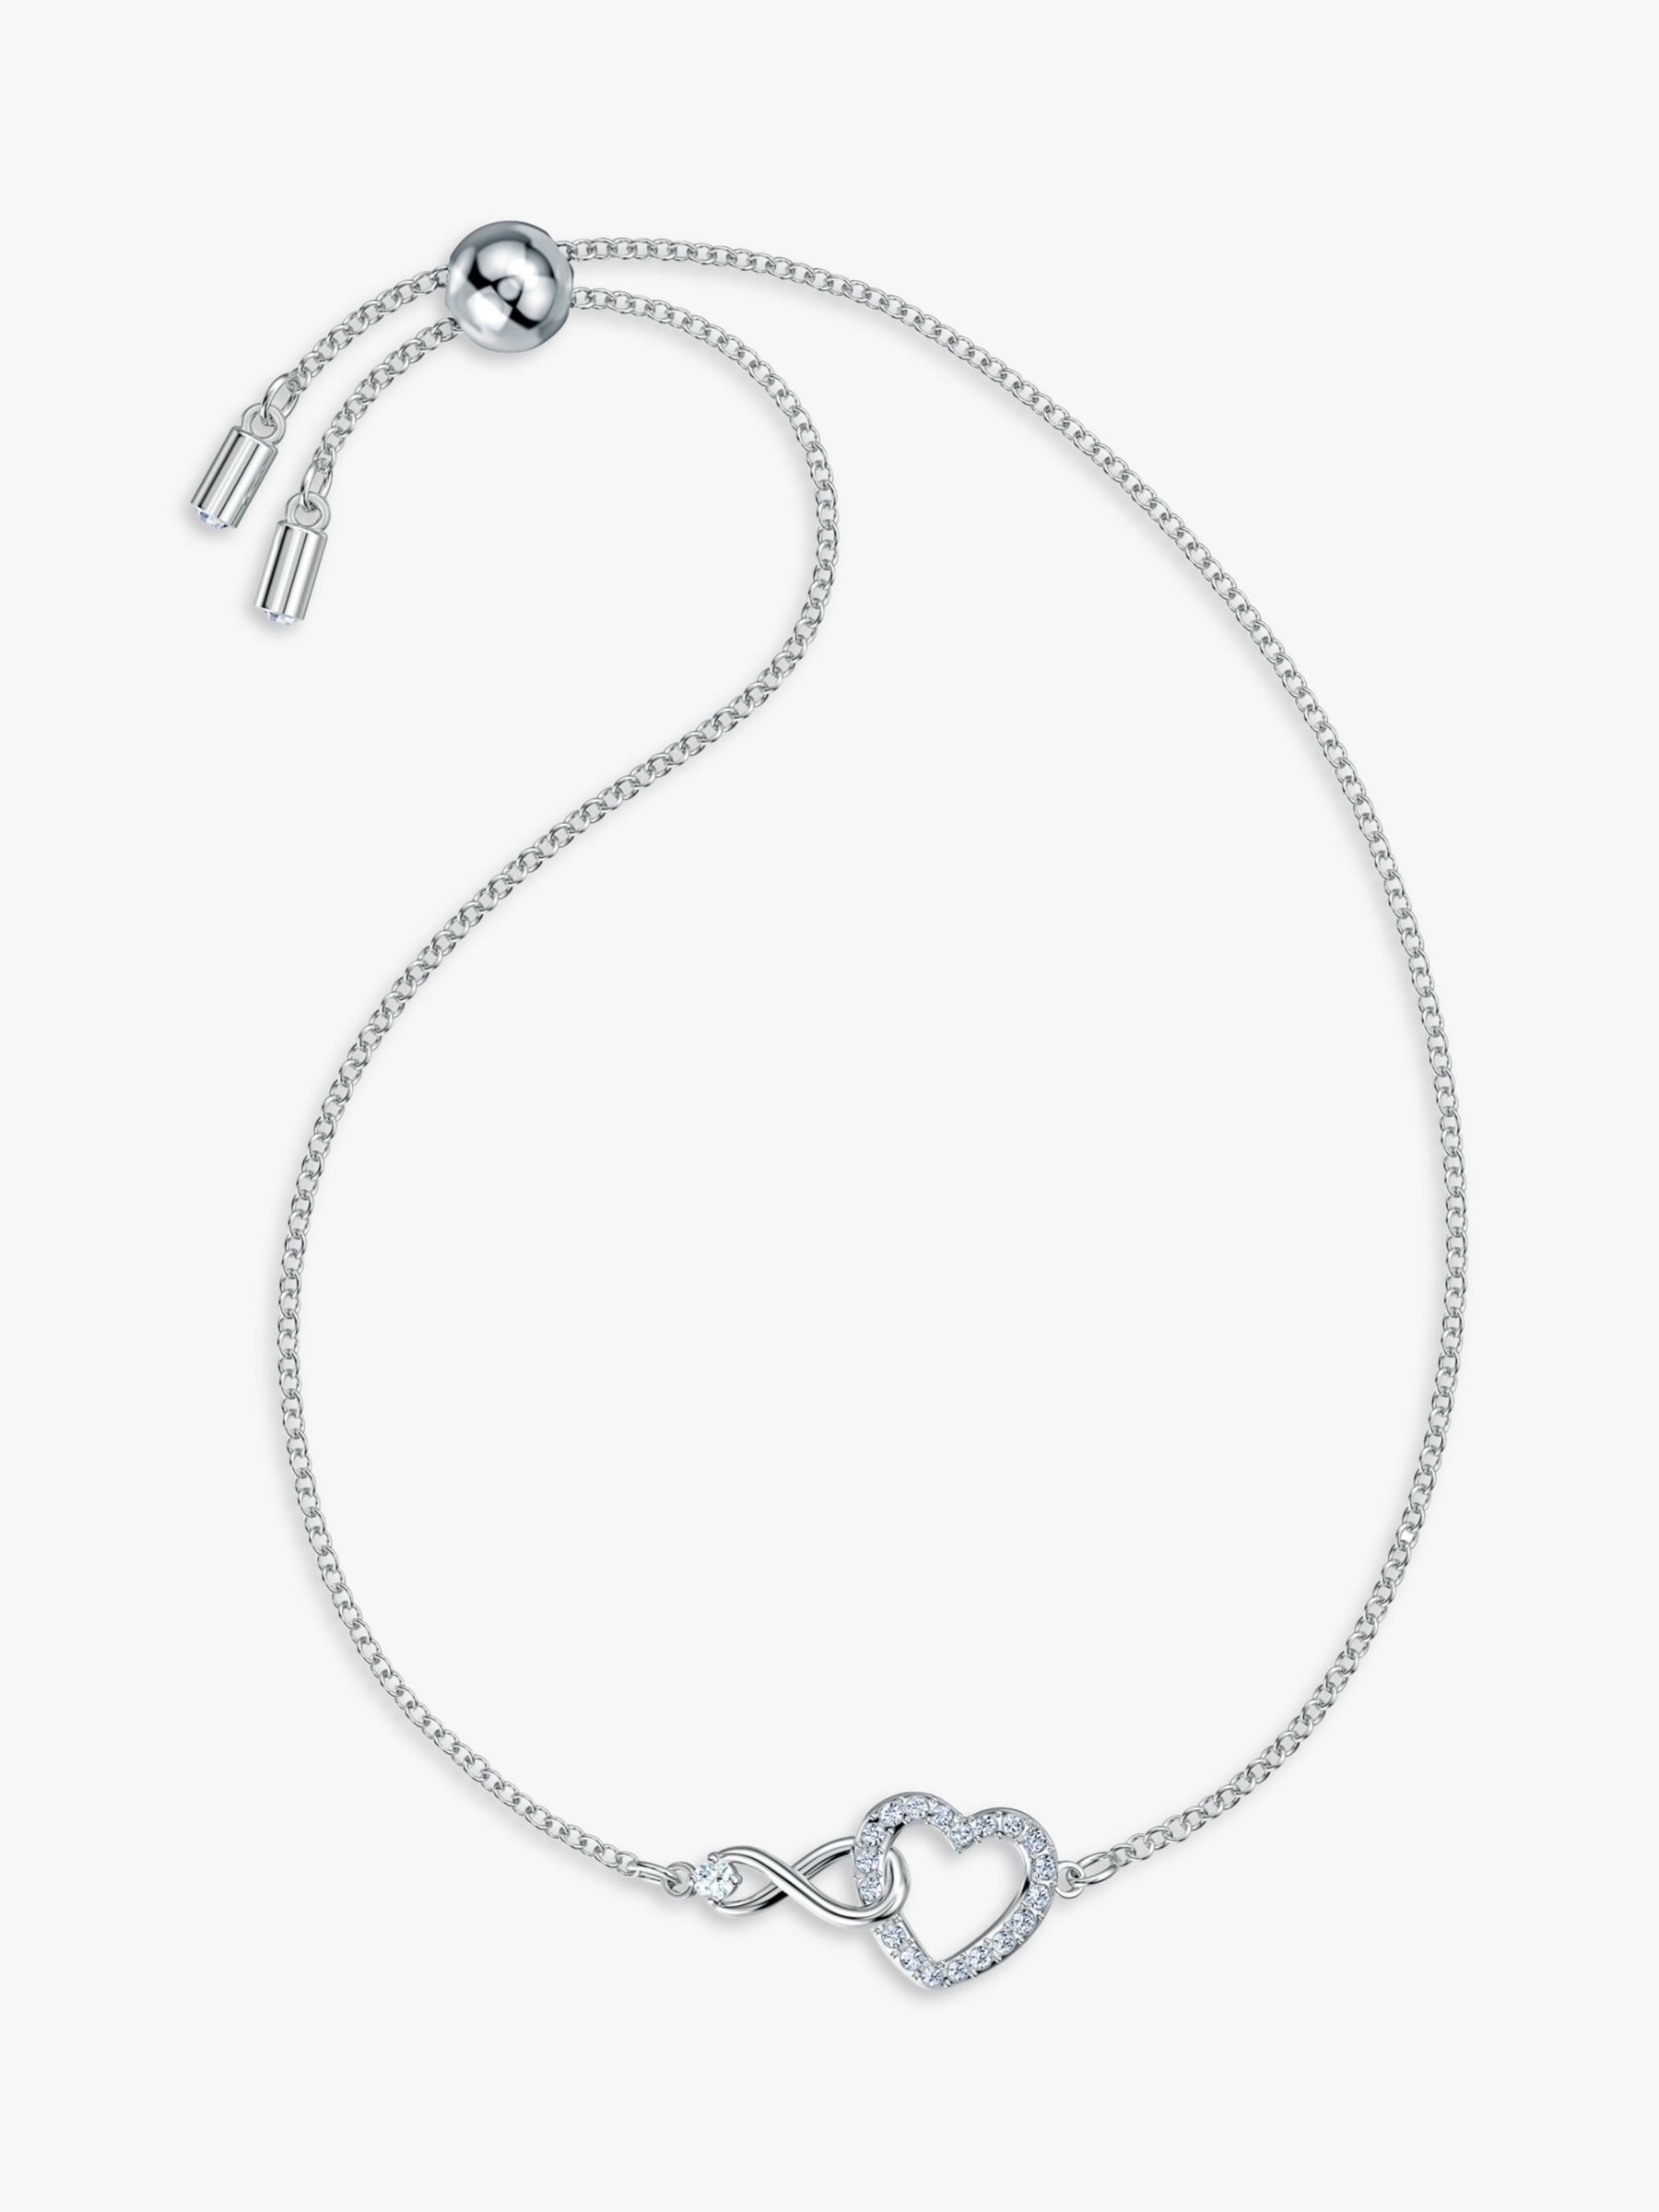 Buy Swarovski Crystal Infinity and Heart Chain Bracelet, Silver Online at johnlewis.com